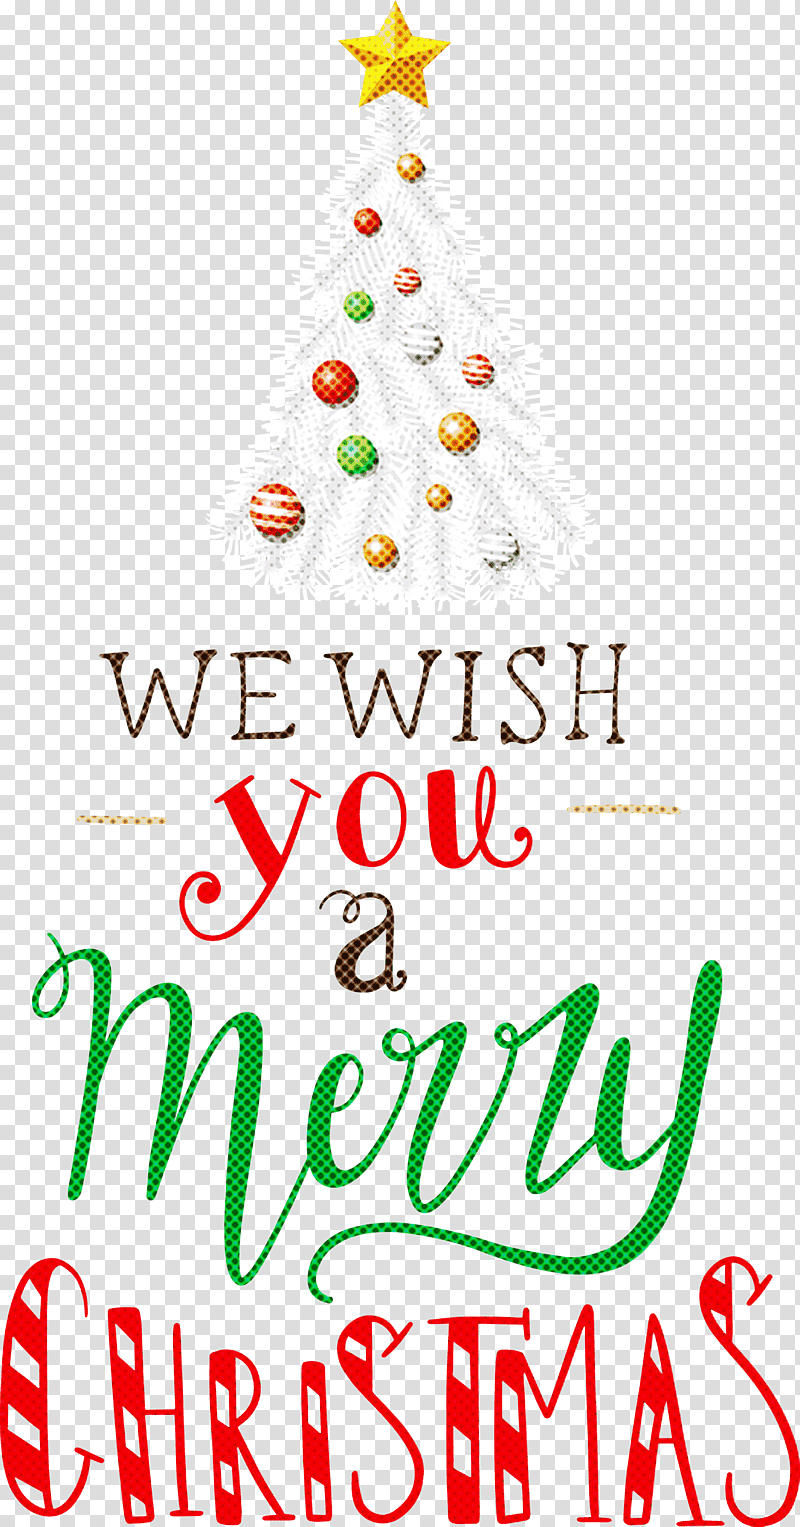 Merry Christmas We Wish You A Merry Christmas, Christmas Tree, Christmas Day, Holiday Ornament, Christmas Ornament, Christmas Ornament M, Fir transparent background PNG clipart